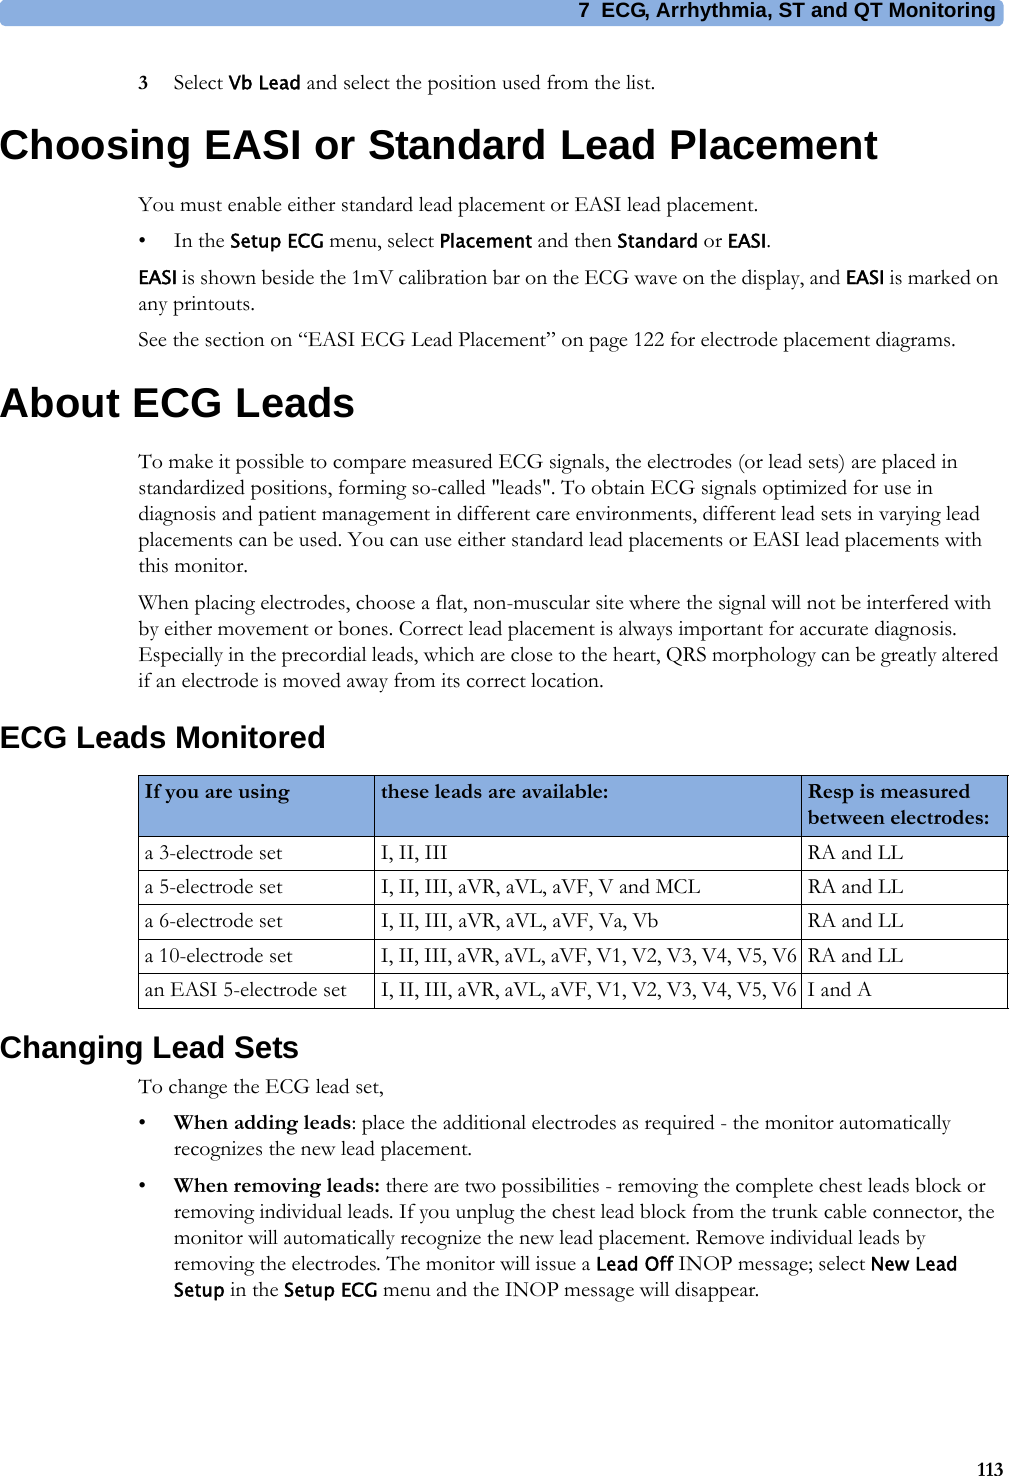 7 ECG, Arrhythmia, ST and QT Monitoring1133Select Vb Lead and select the position used from the list.Choosing EASI or Standard Lead PlacementYou must enable either standard lead placement or EASI lead placement.•In the Setup ECG menu, select Placement and then Standard or EASI.EASI is shown beside the 1mV calibration bar on the ECG wave on the display, and EASI is marked on any printouts.See the section on “EASI ECG Lead Placement” on page 122 for electrode placement diagrams.About ECG LeadsTo make it possible to compare measured ECG signals, the electrodes (or lead sets) are placed in standardized positions, forming so-called &quot;leads&quot;. To obtain ECG signals optimized for use in diagnosis and patient management in different care environments, different lead sets in varying lead placements can be used. You can use either standard lead placements or EASI lead placements with this monitor.When placing electrodes, choose a flat, non-muscular site where the signal will not be interfered with by either movement or bones. Correct lead placement is always important for accurate diagnosis. Especially in the precordial leads, which are close to the heart, QRS morphology can be greatly altered if an electrode is moved away from its correct location.ECG Leads MonitoredChanging Lead SetsTo change the ECG lead set,•When adding leads: place the additional electrodes as required - the monitor automatically recognizes the new lead placement.•When removing leads: there are two possibilities - removing the complete chest leads block or removing individual leads. If you unplug the chest lead block from the trunk cable connector, the monitor will automatically recognize the new lead placement. Remove individual leads by removing the electrodes. The monitor will issue a Lead Off INOP message; select New Lead Setup in the Setup ECG menu and the INOP message will disappear.If you are using these leads are available: Resp is measured between electrodes:a 3-electrode set I, II, III RA and LLa 5-electrode set I, II, III, aVR, aVL, aVF, V and MCL RA and LLa 6-electrode set I, II, III, aVR, aVL, aVF, Va, Vb RA and LLa 10-electrode set I, II, III, aVR, aVL, aVF, V1, V2, V3, V4, V5, V6 RA and LLan EASI 5-electrode set I, II, III, aVR, aVL, aVF, V1, V2, V3, V4, V5, V6 I and A